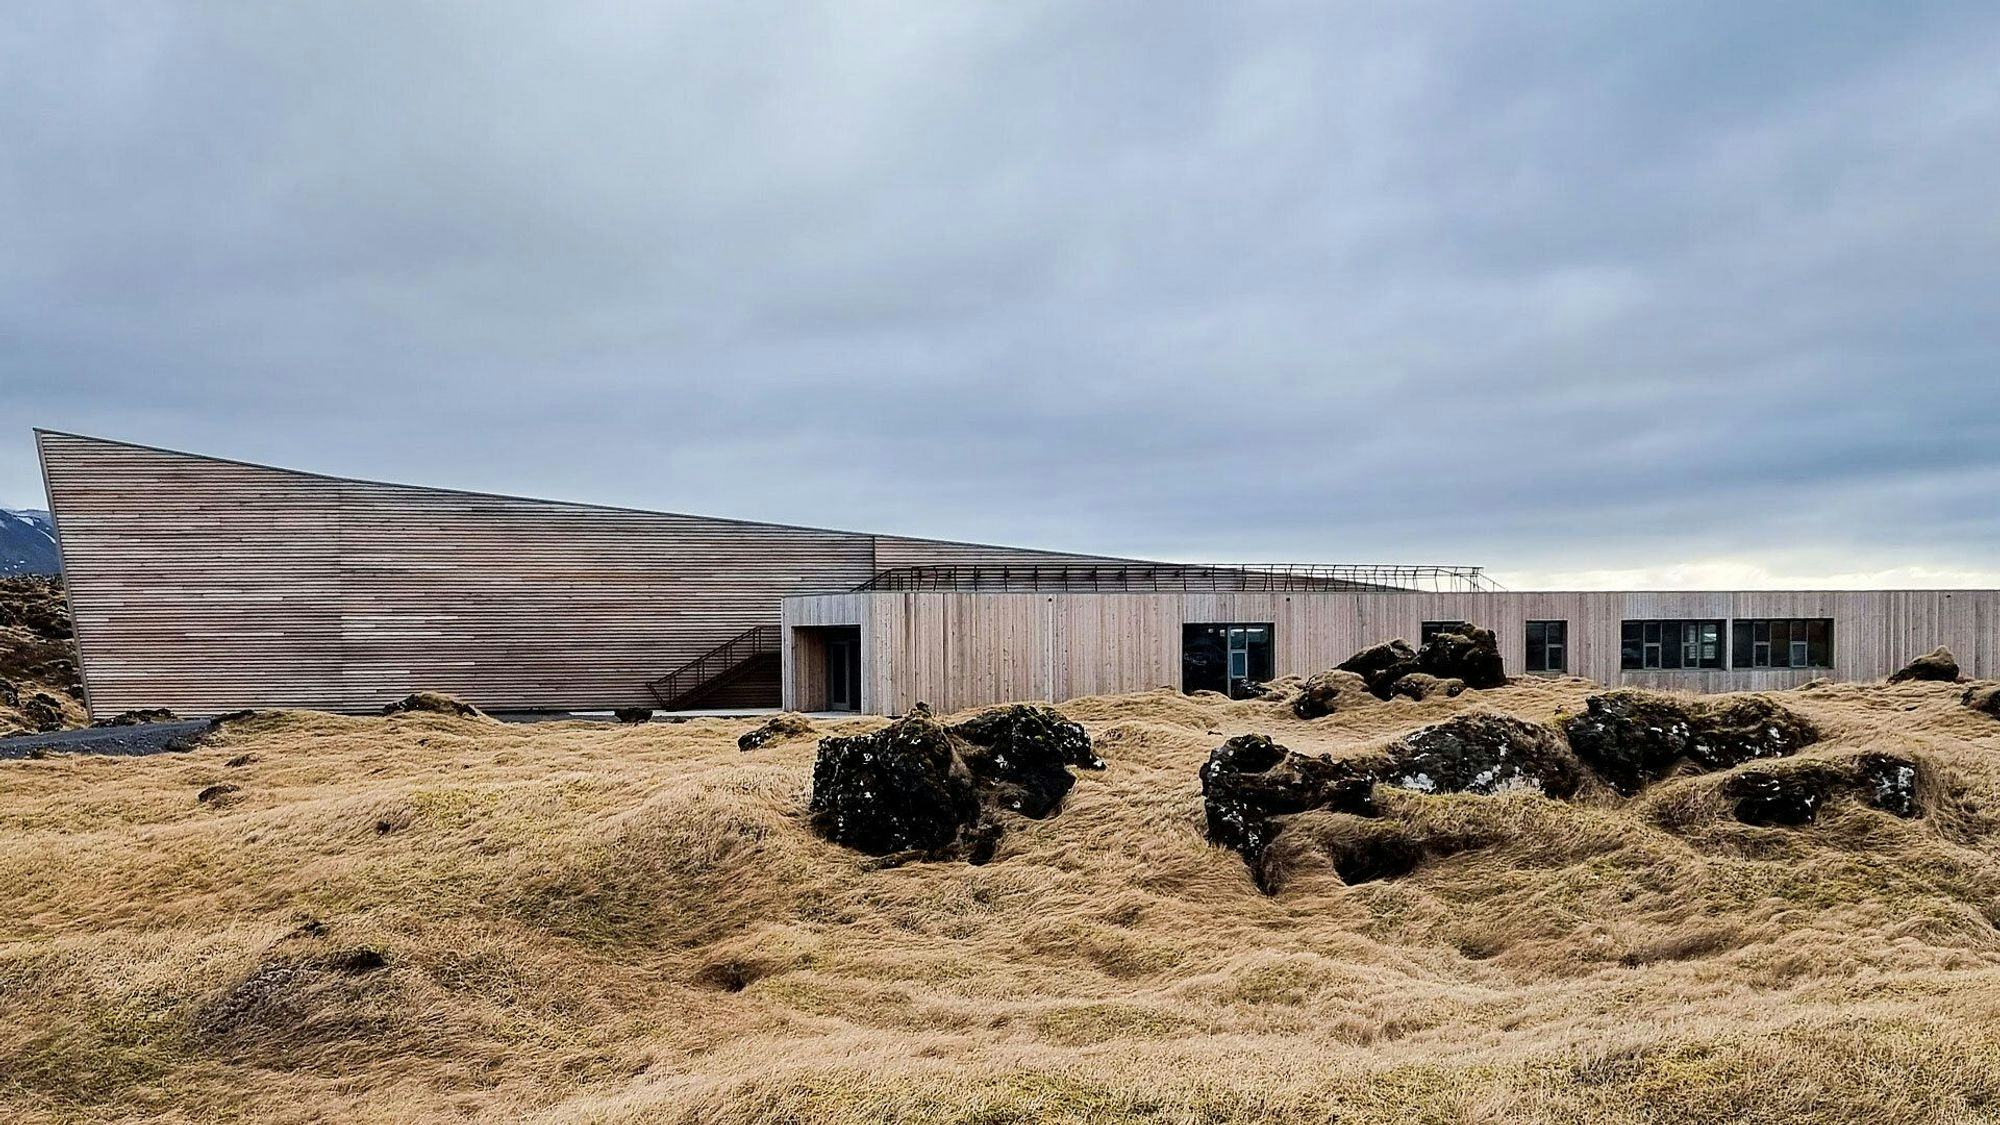 A modern building with unique curved wooden facade, set in rugged landscape with moss covered rocks